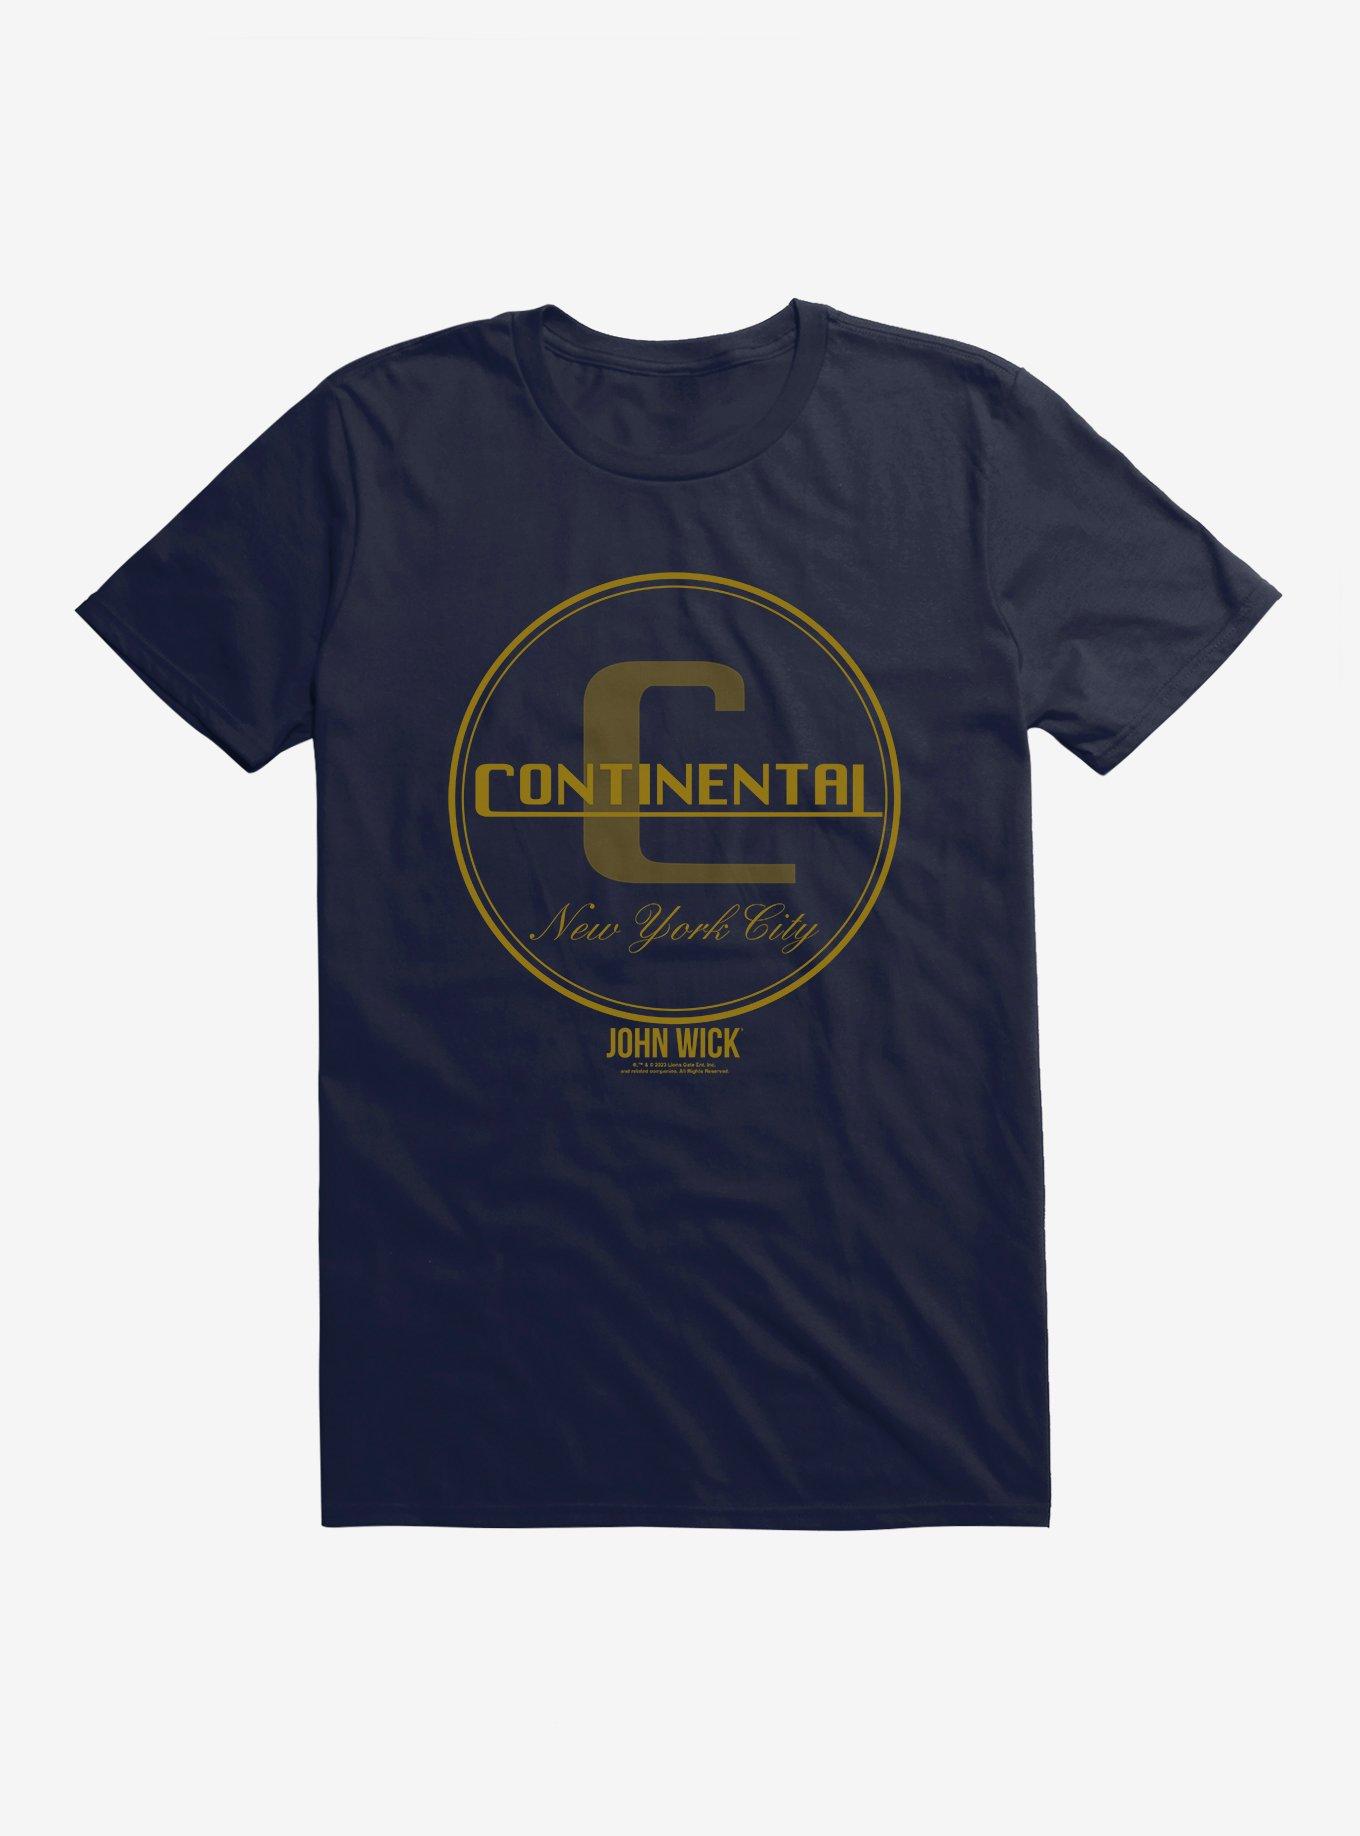 The Continental: From World Of John Wick New York City T-Shirt